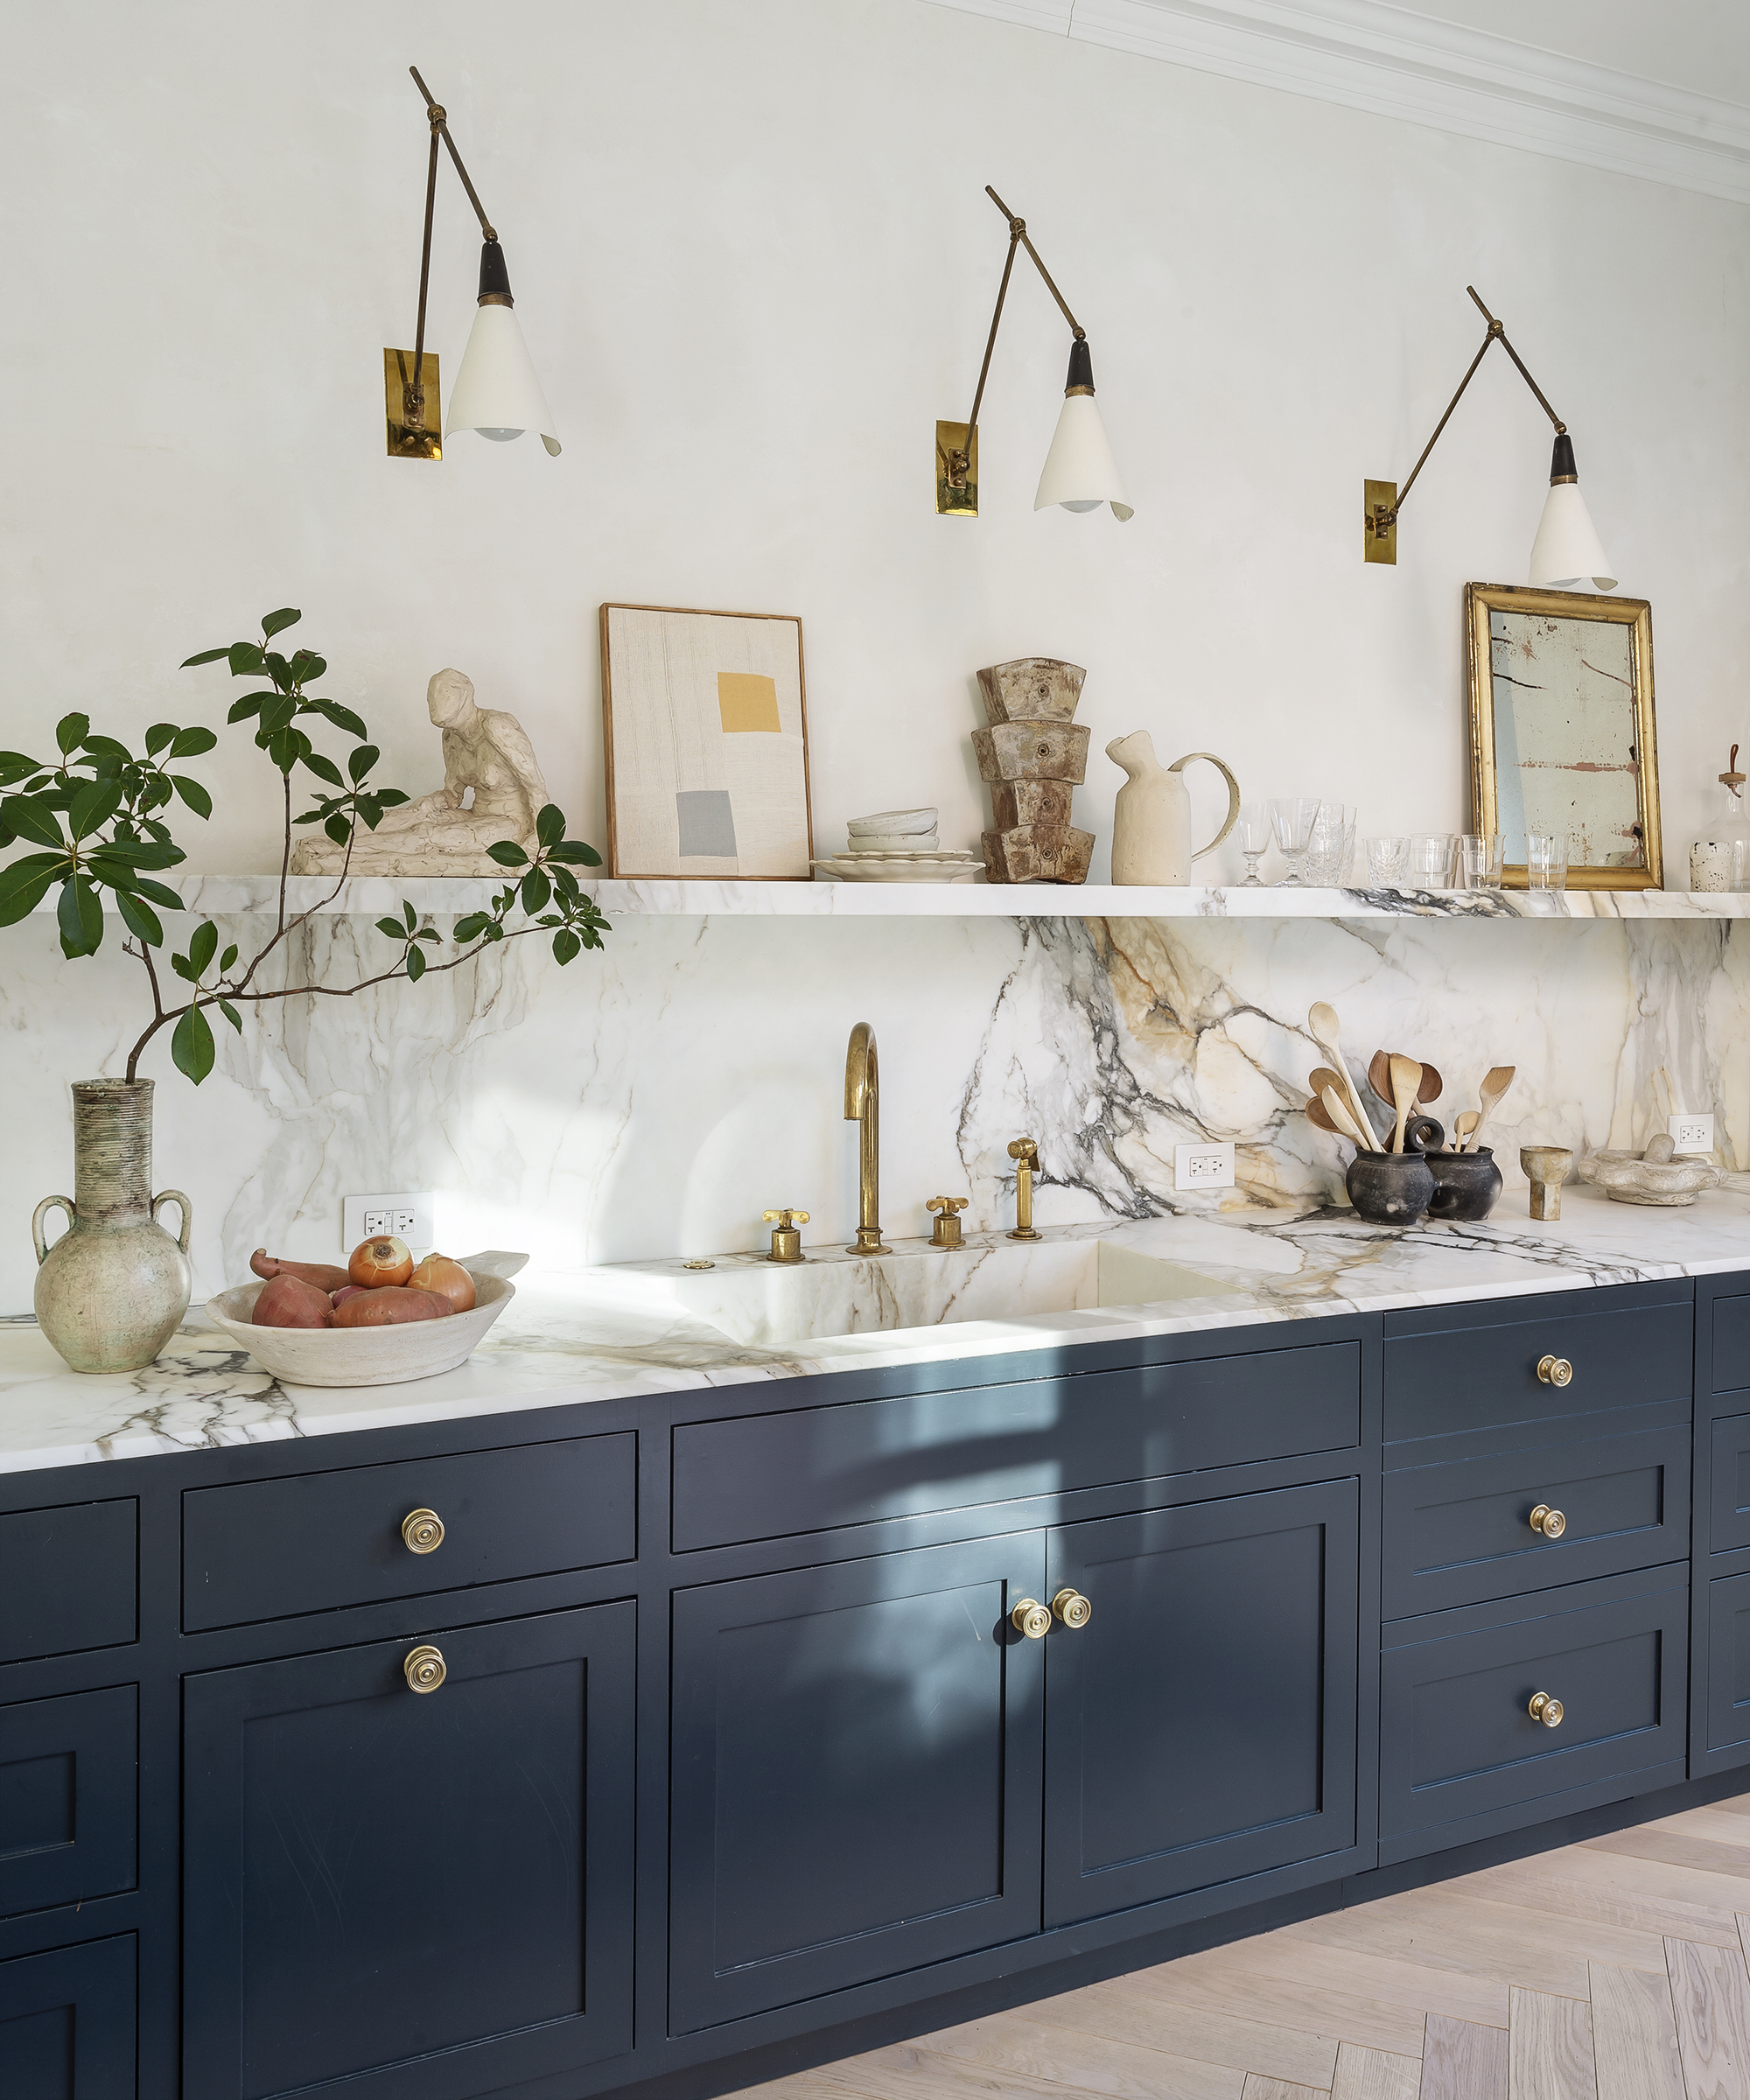 A kitchen with gold wall lights, marble surfaces and shelving and dark blue cabinetry.